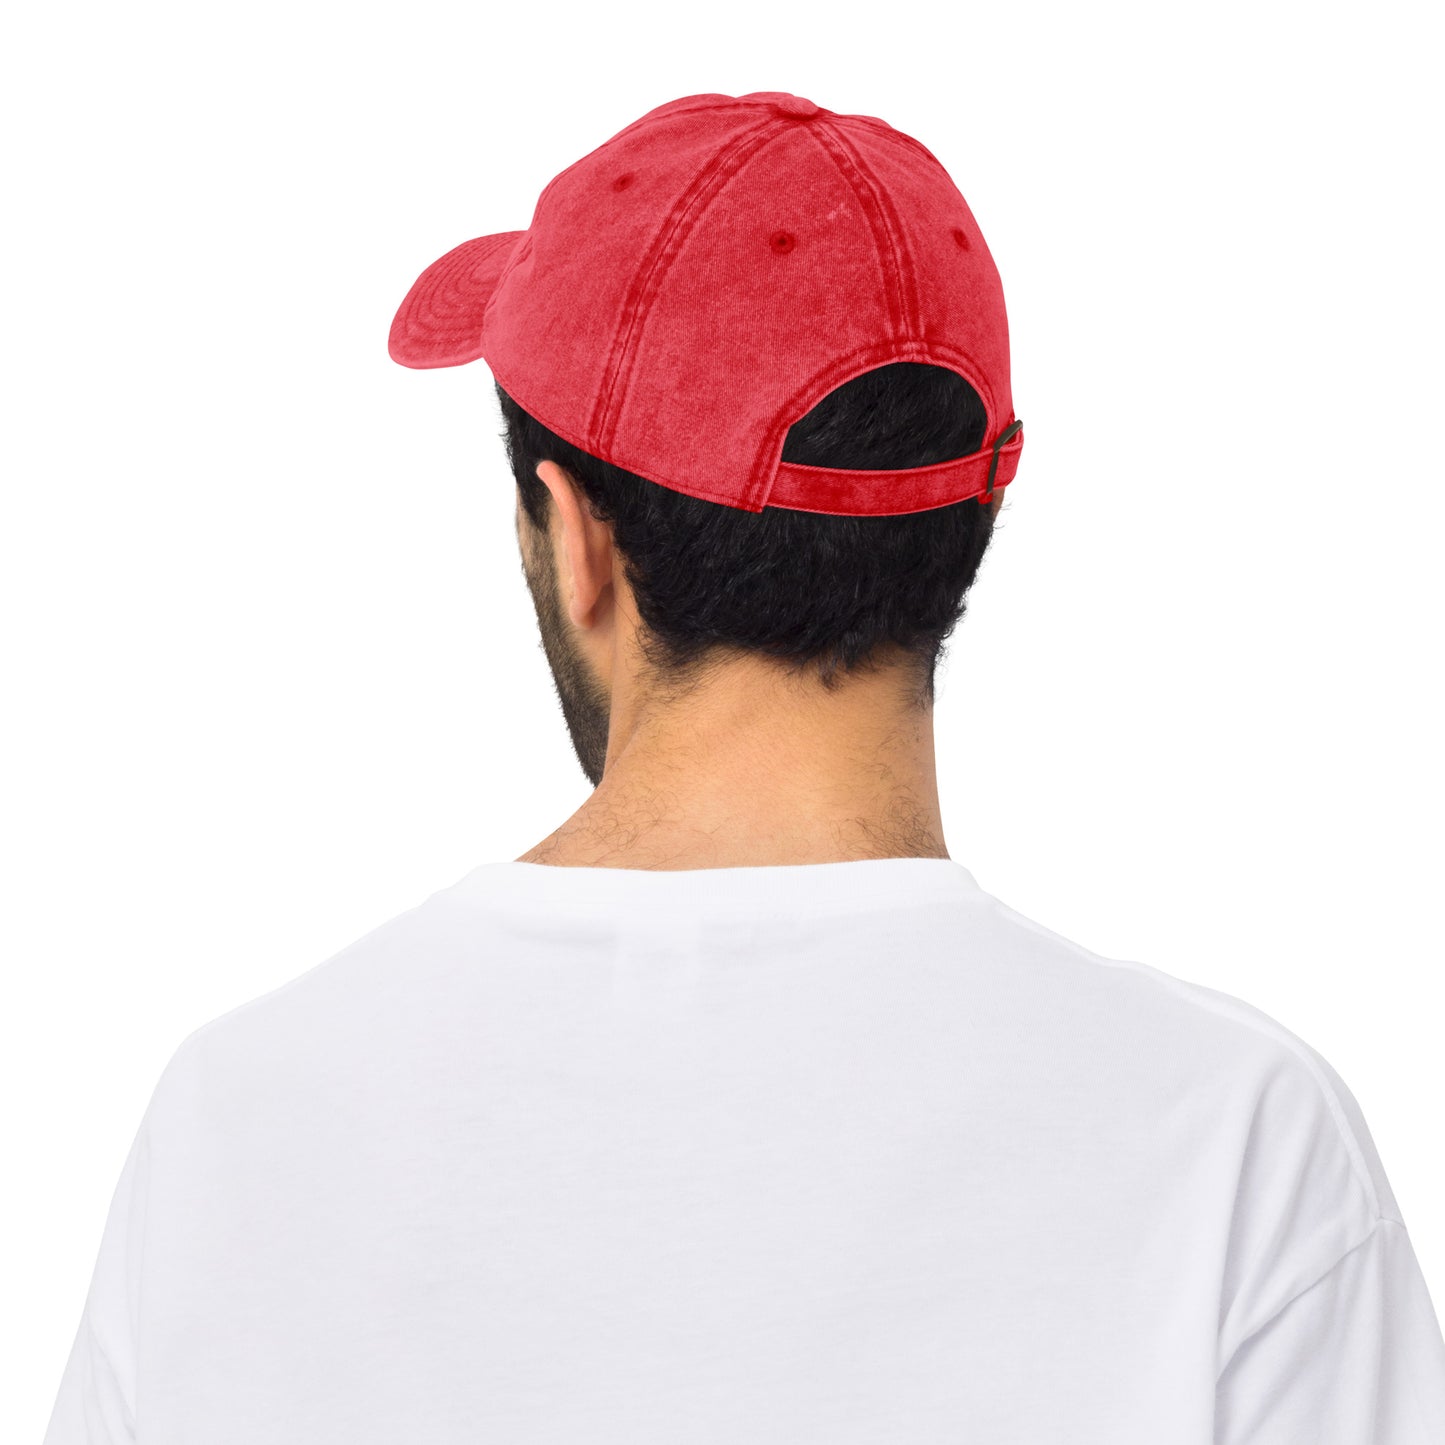 Maple Leaf Twill Cap - Red/White • YYJ Victoria • YHM Designs - Image 12